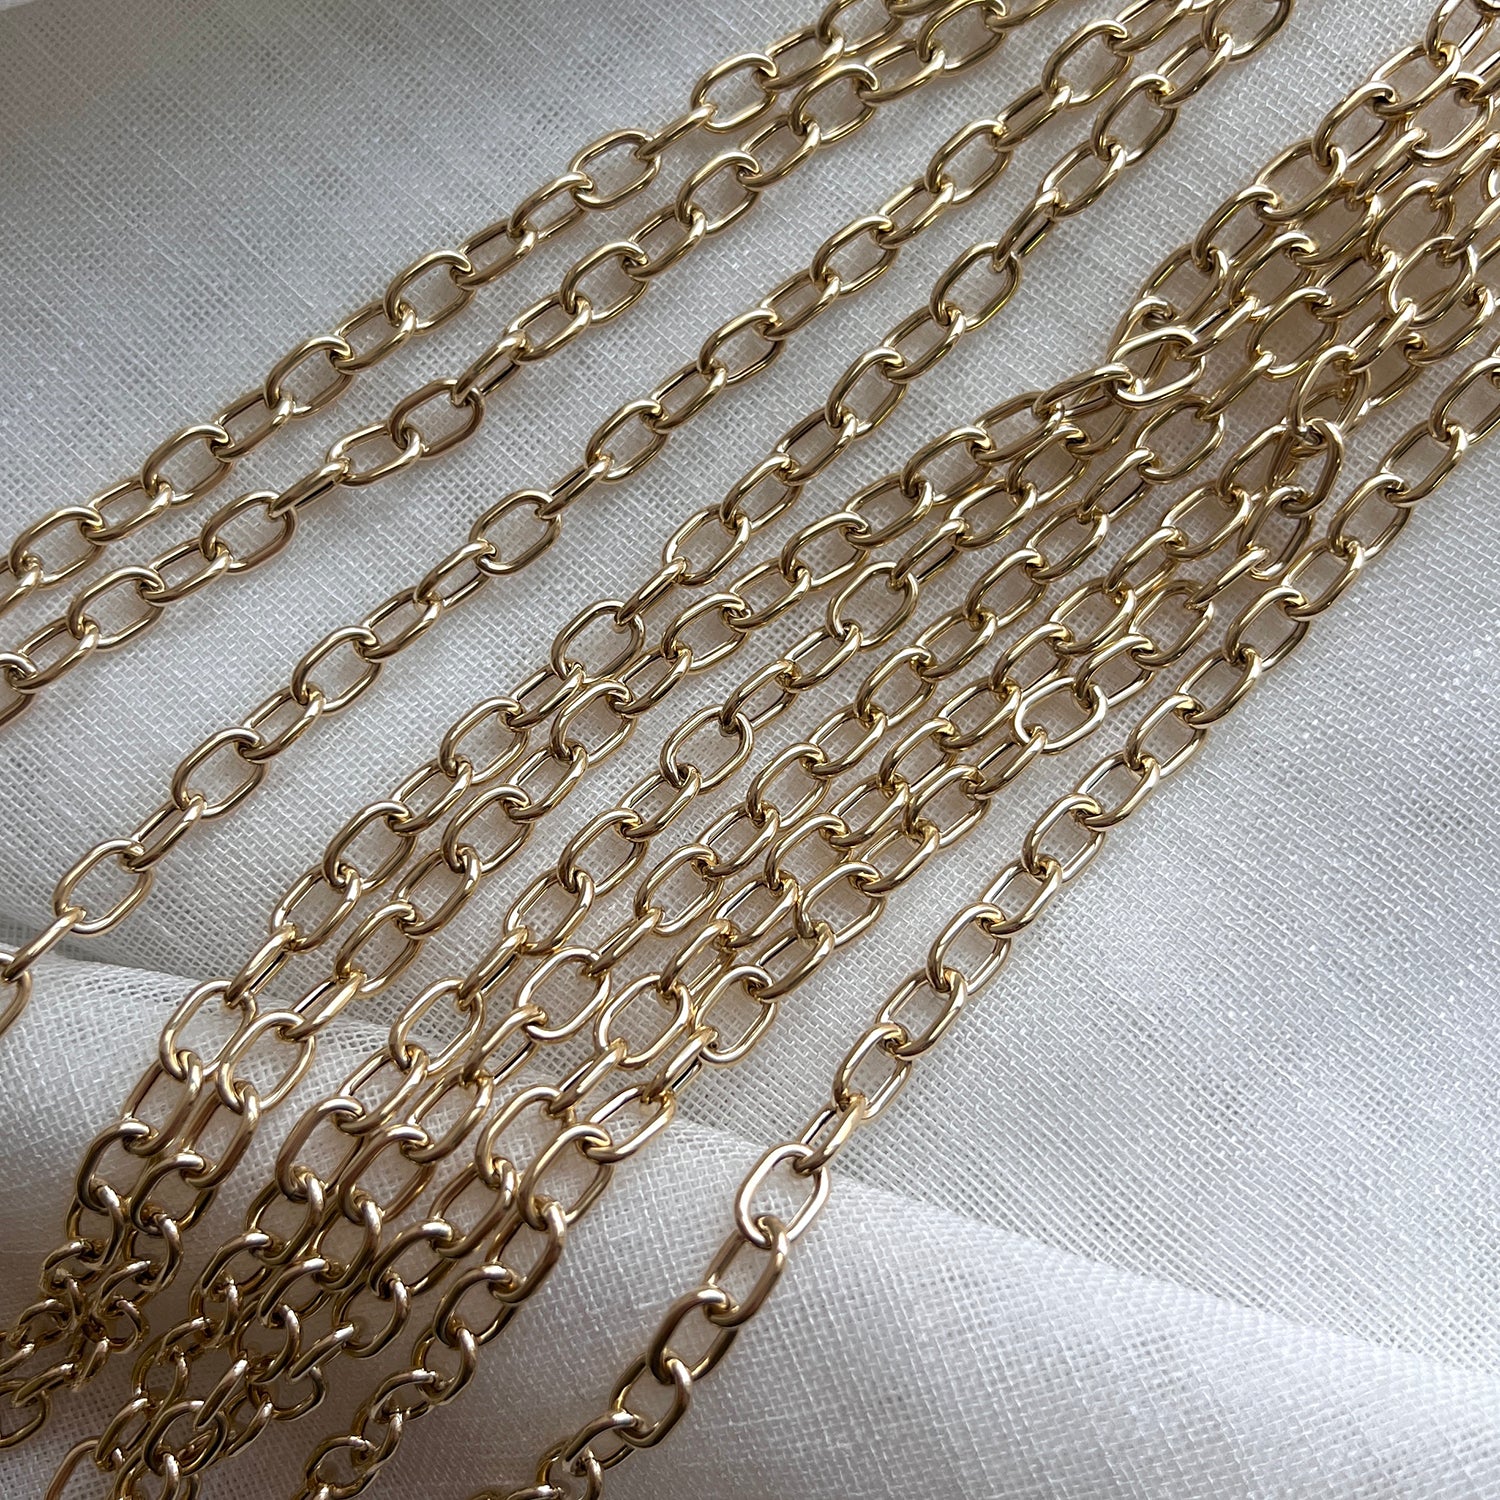 14K Diamond Cut Cuban Link Chain Bracelet 14K Yellow Gold / 7.5 Inches by Baby Gold - Shop Custom Gold Jewelry